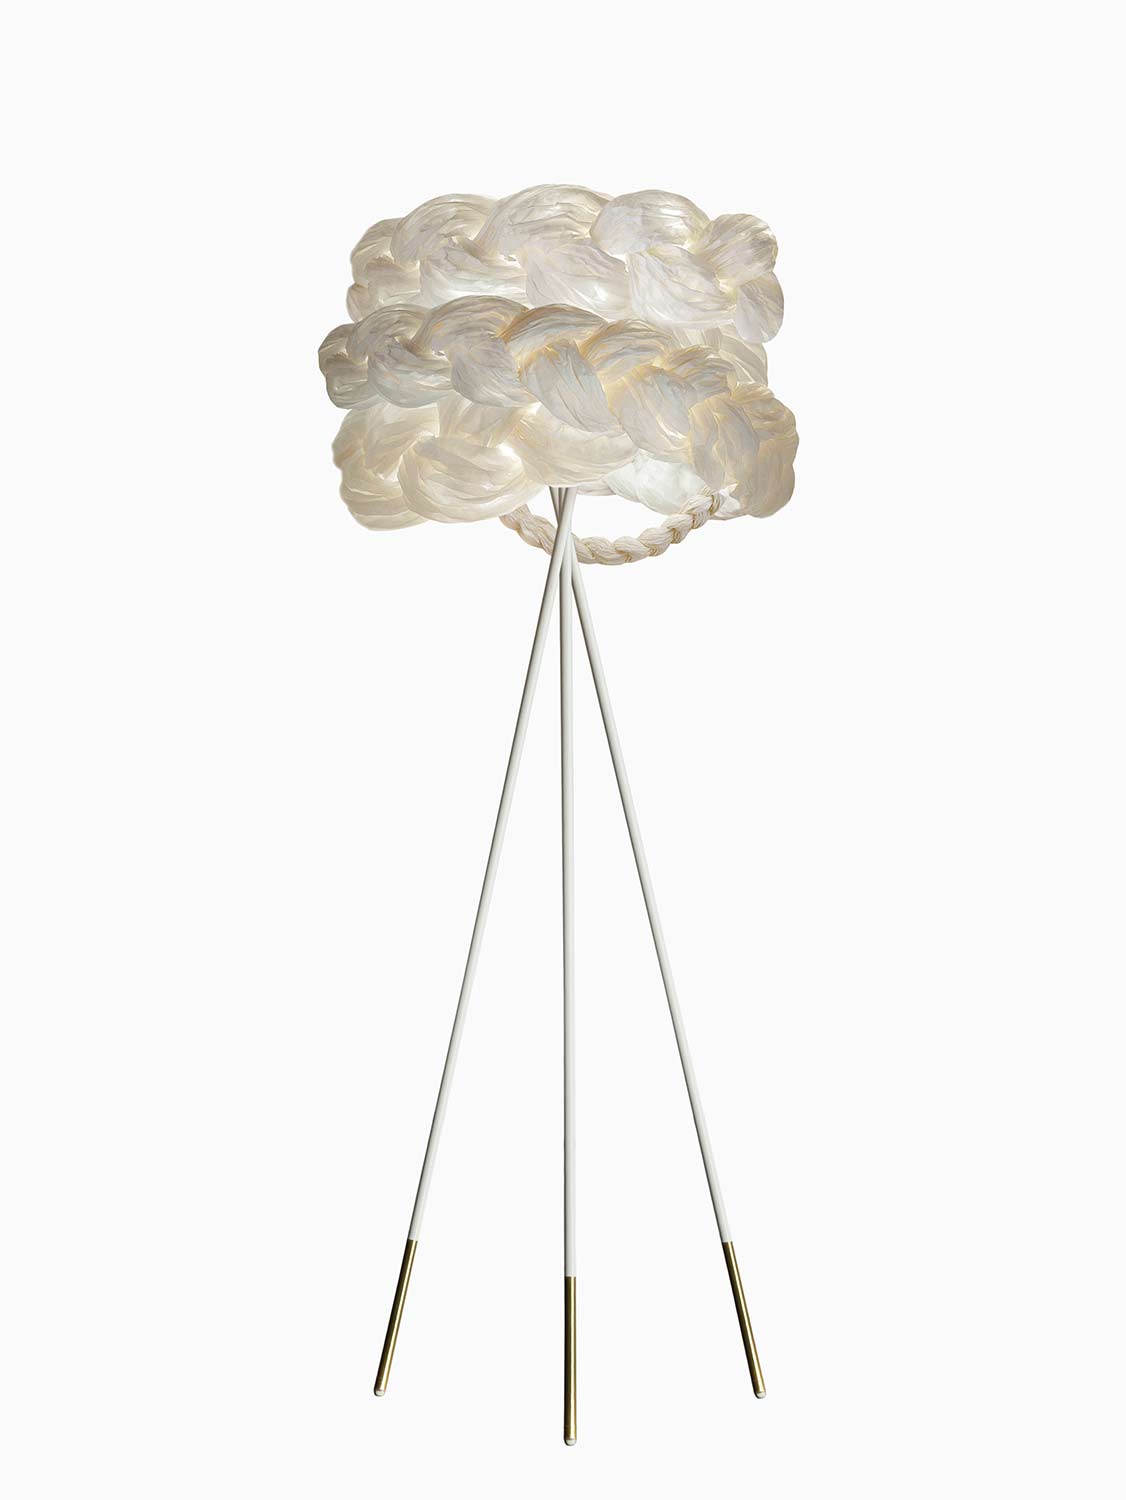 White Paper Braided Unique Handmade Floor  Lamp | Cozy Atmosphere Lighting | Contemporary Natural Lighting for Living room,  Bedroom & Lobby | Sustainable Design Lighting | baby & kids room lighting | White interior | mammalampa The Bride free-standing lamp M